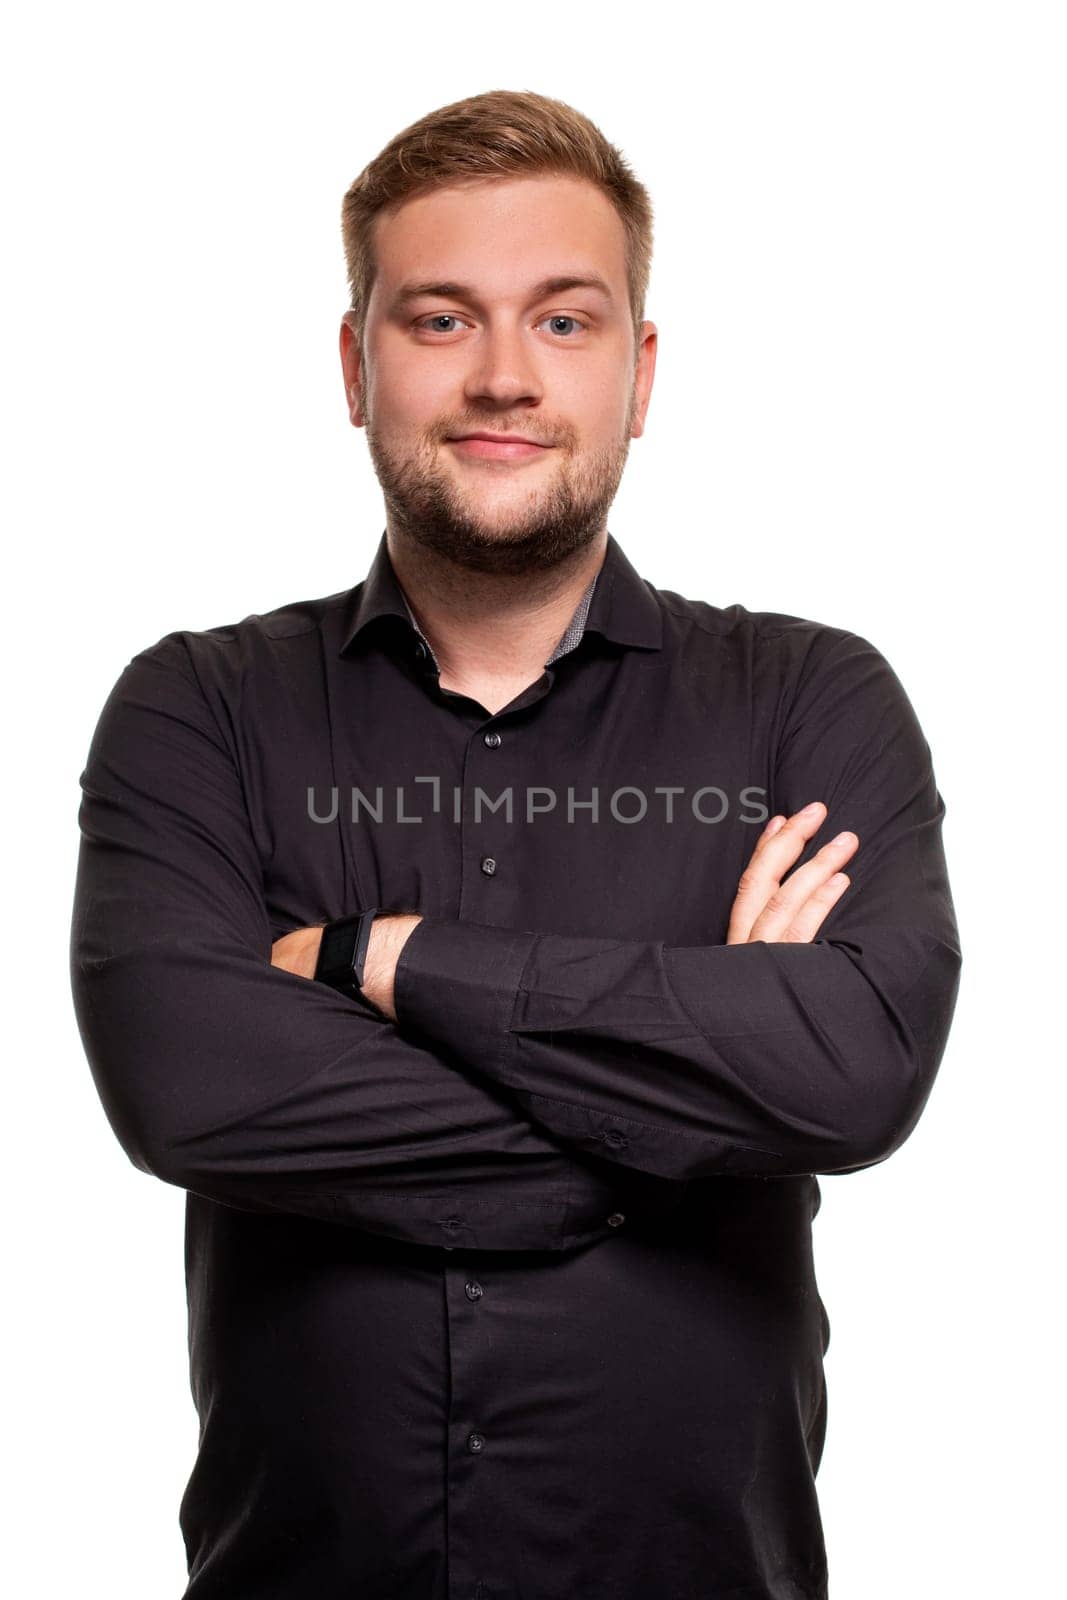 Feeling great. Young man in black shirt is smiling and crossed his arms over chest against white background.